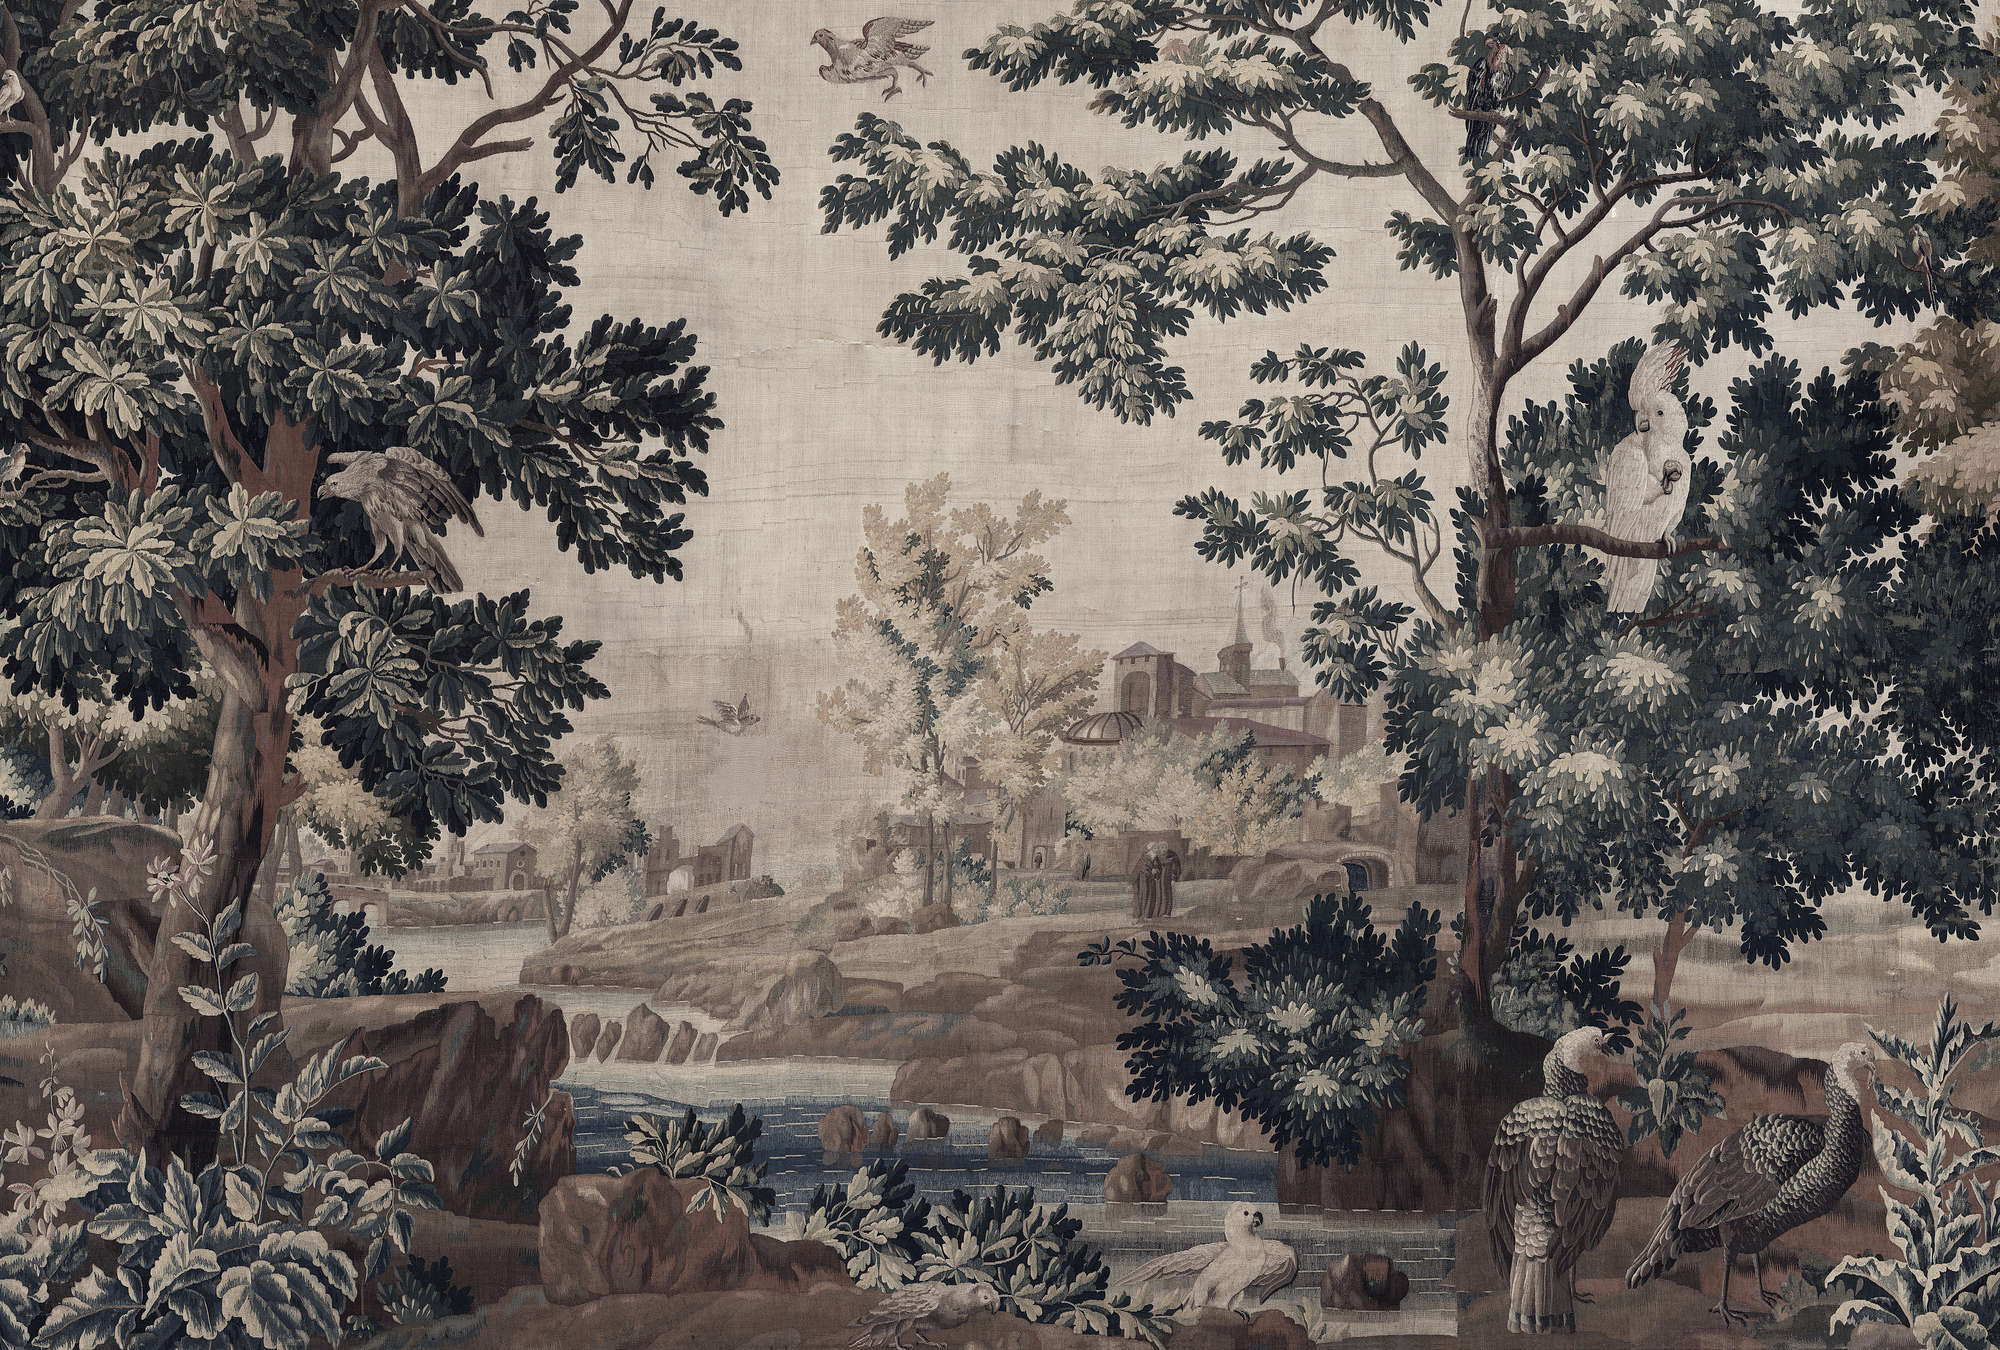             Tapestry Gallery 1 - landscape photo wallpaper historical tapestry
        